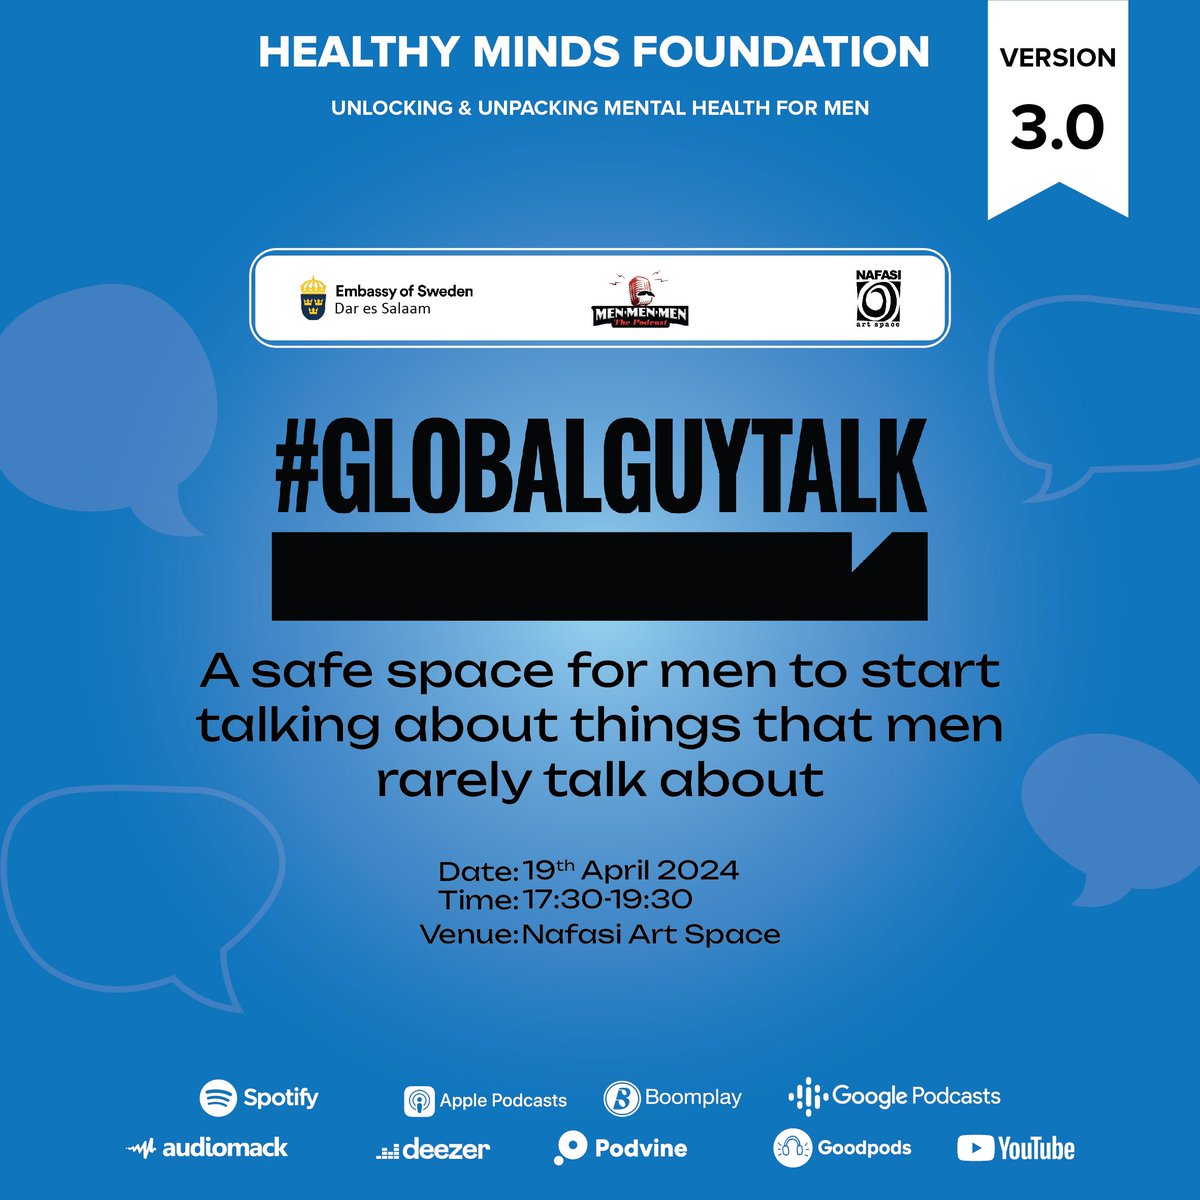 Join us for an insightful evening of global guy talk, Excited to partner with @swedenintz for an engaging event at Nafasi Art Space @nafasiartspace Dar es Salaam, hosted by the Sweden Embassy. Let’s discuss, connect, and inspire, this Friday, April 19th, from 17:30 to 19:30.